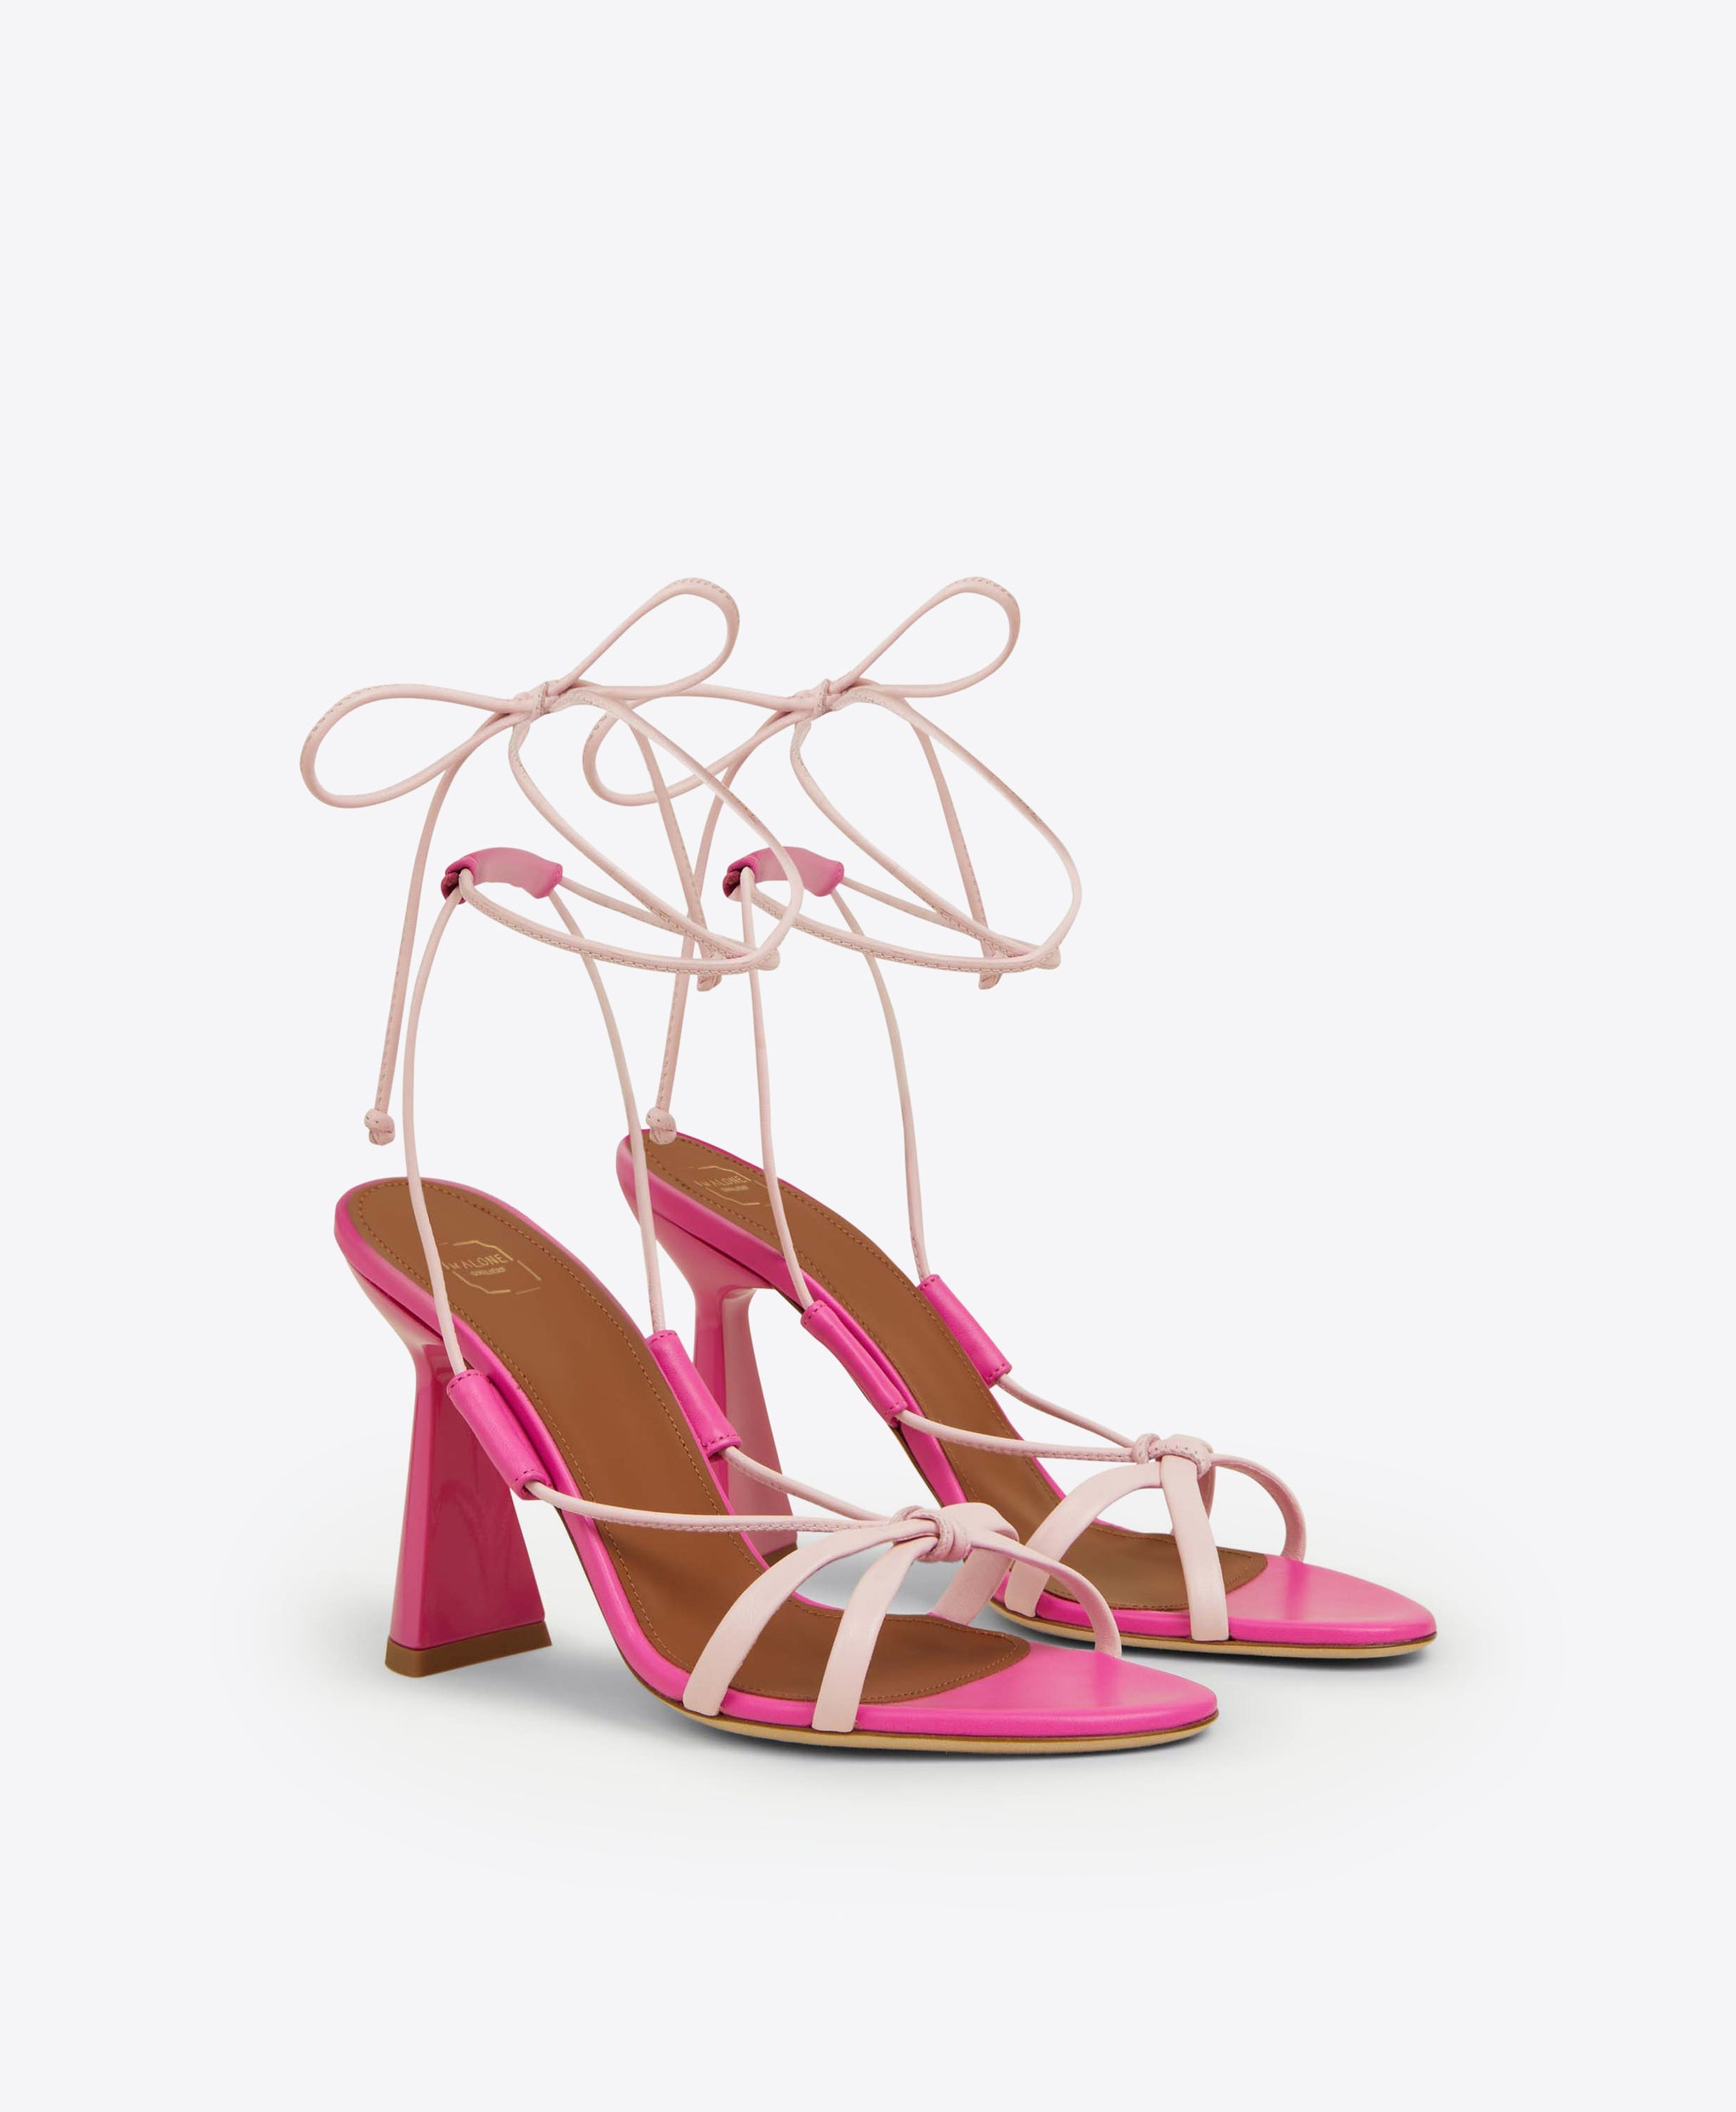 Malone Souliers Kenny 95mm Pink Leather Heeled Sandals 